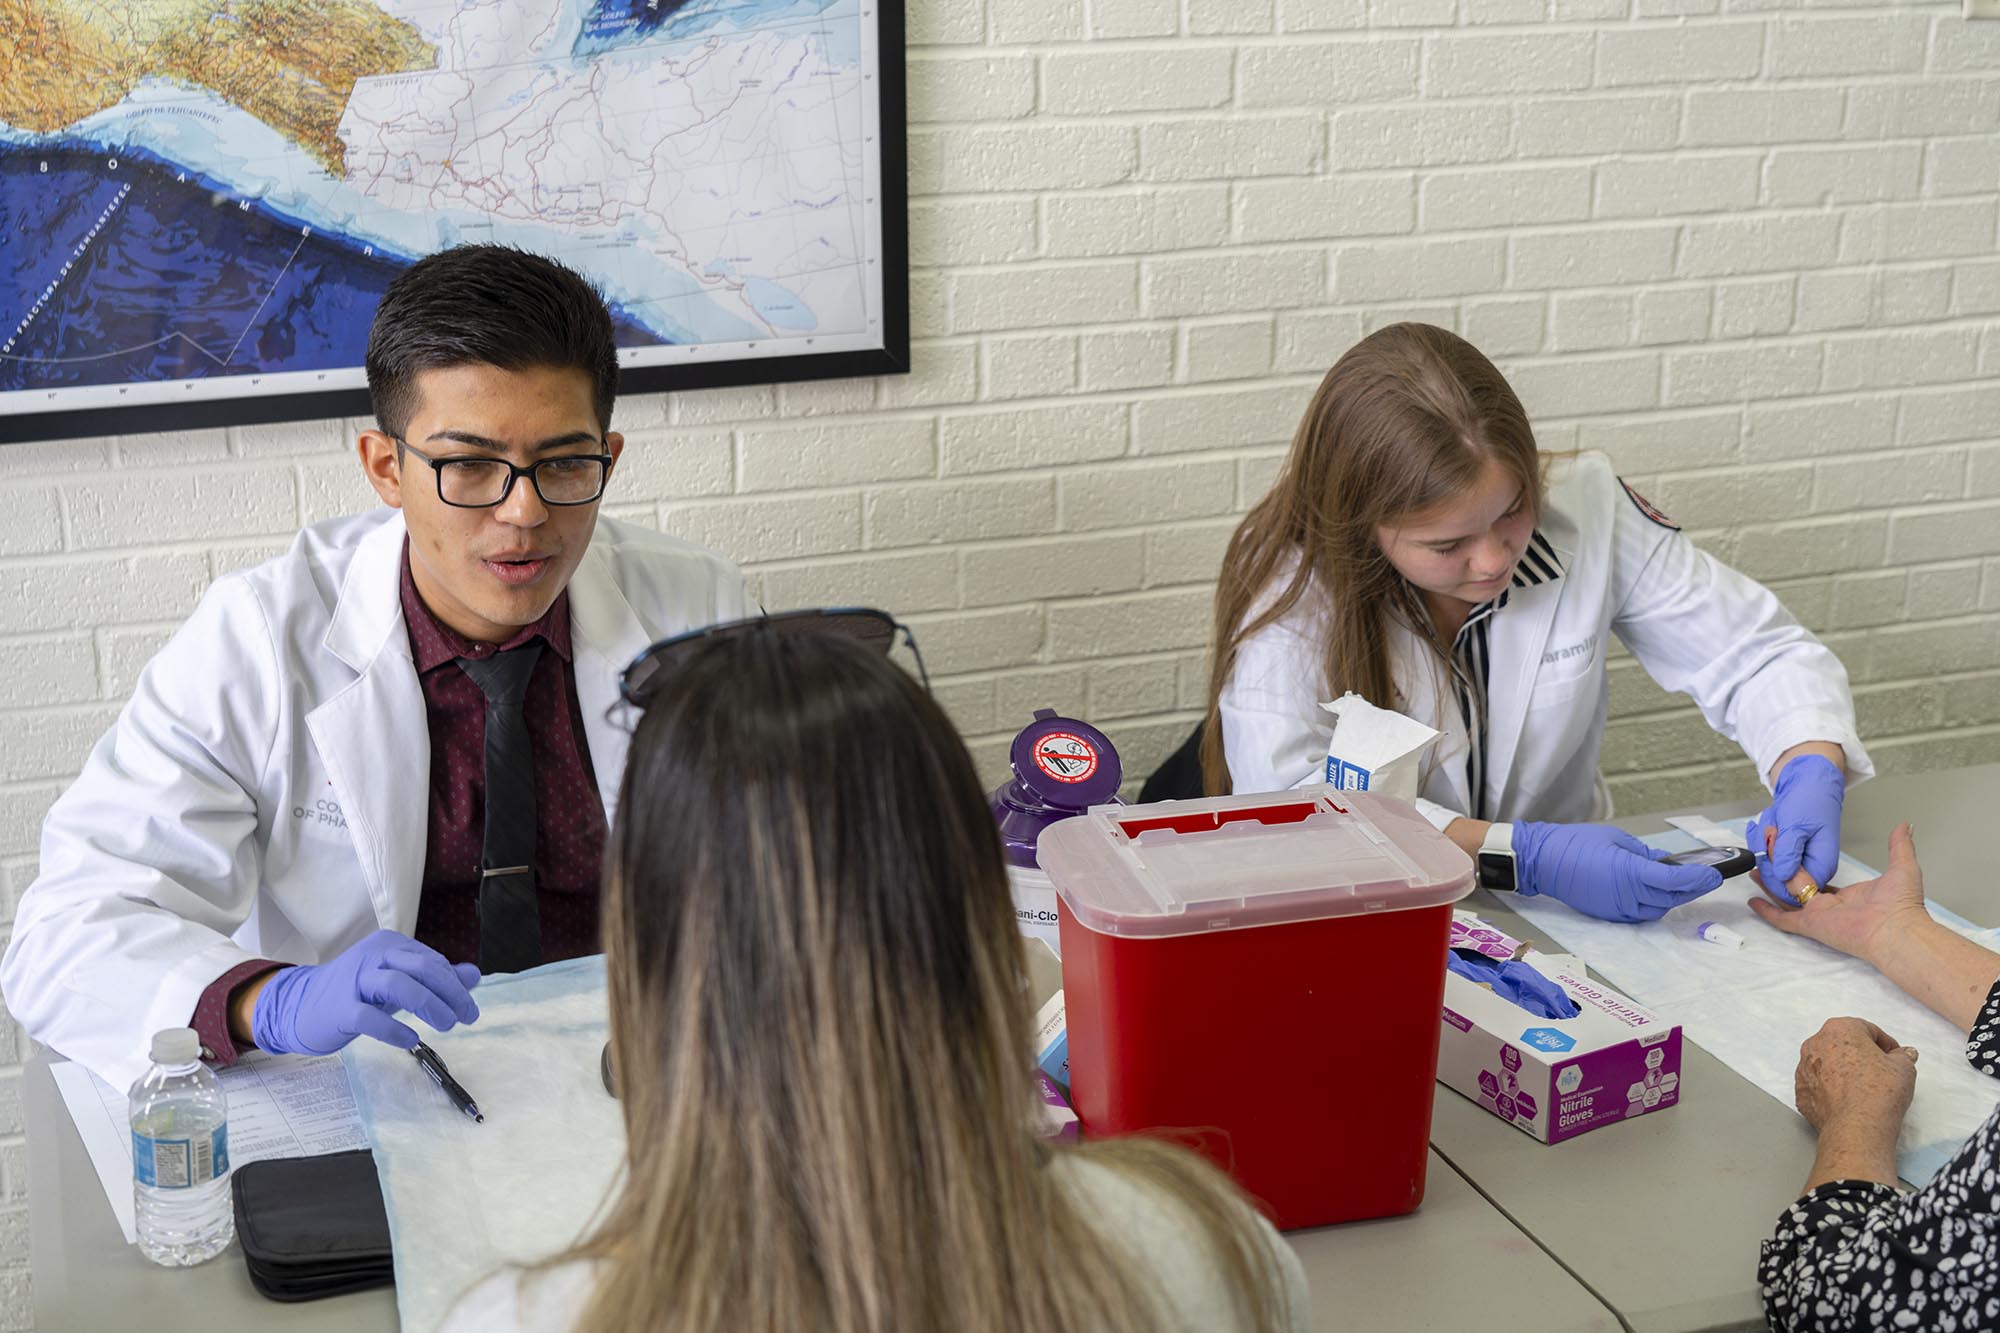 Students provide services during the 2019 Community Outreach Day.